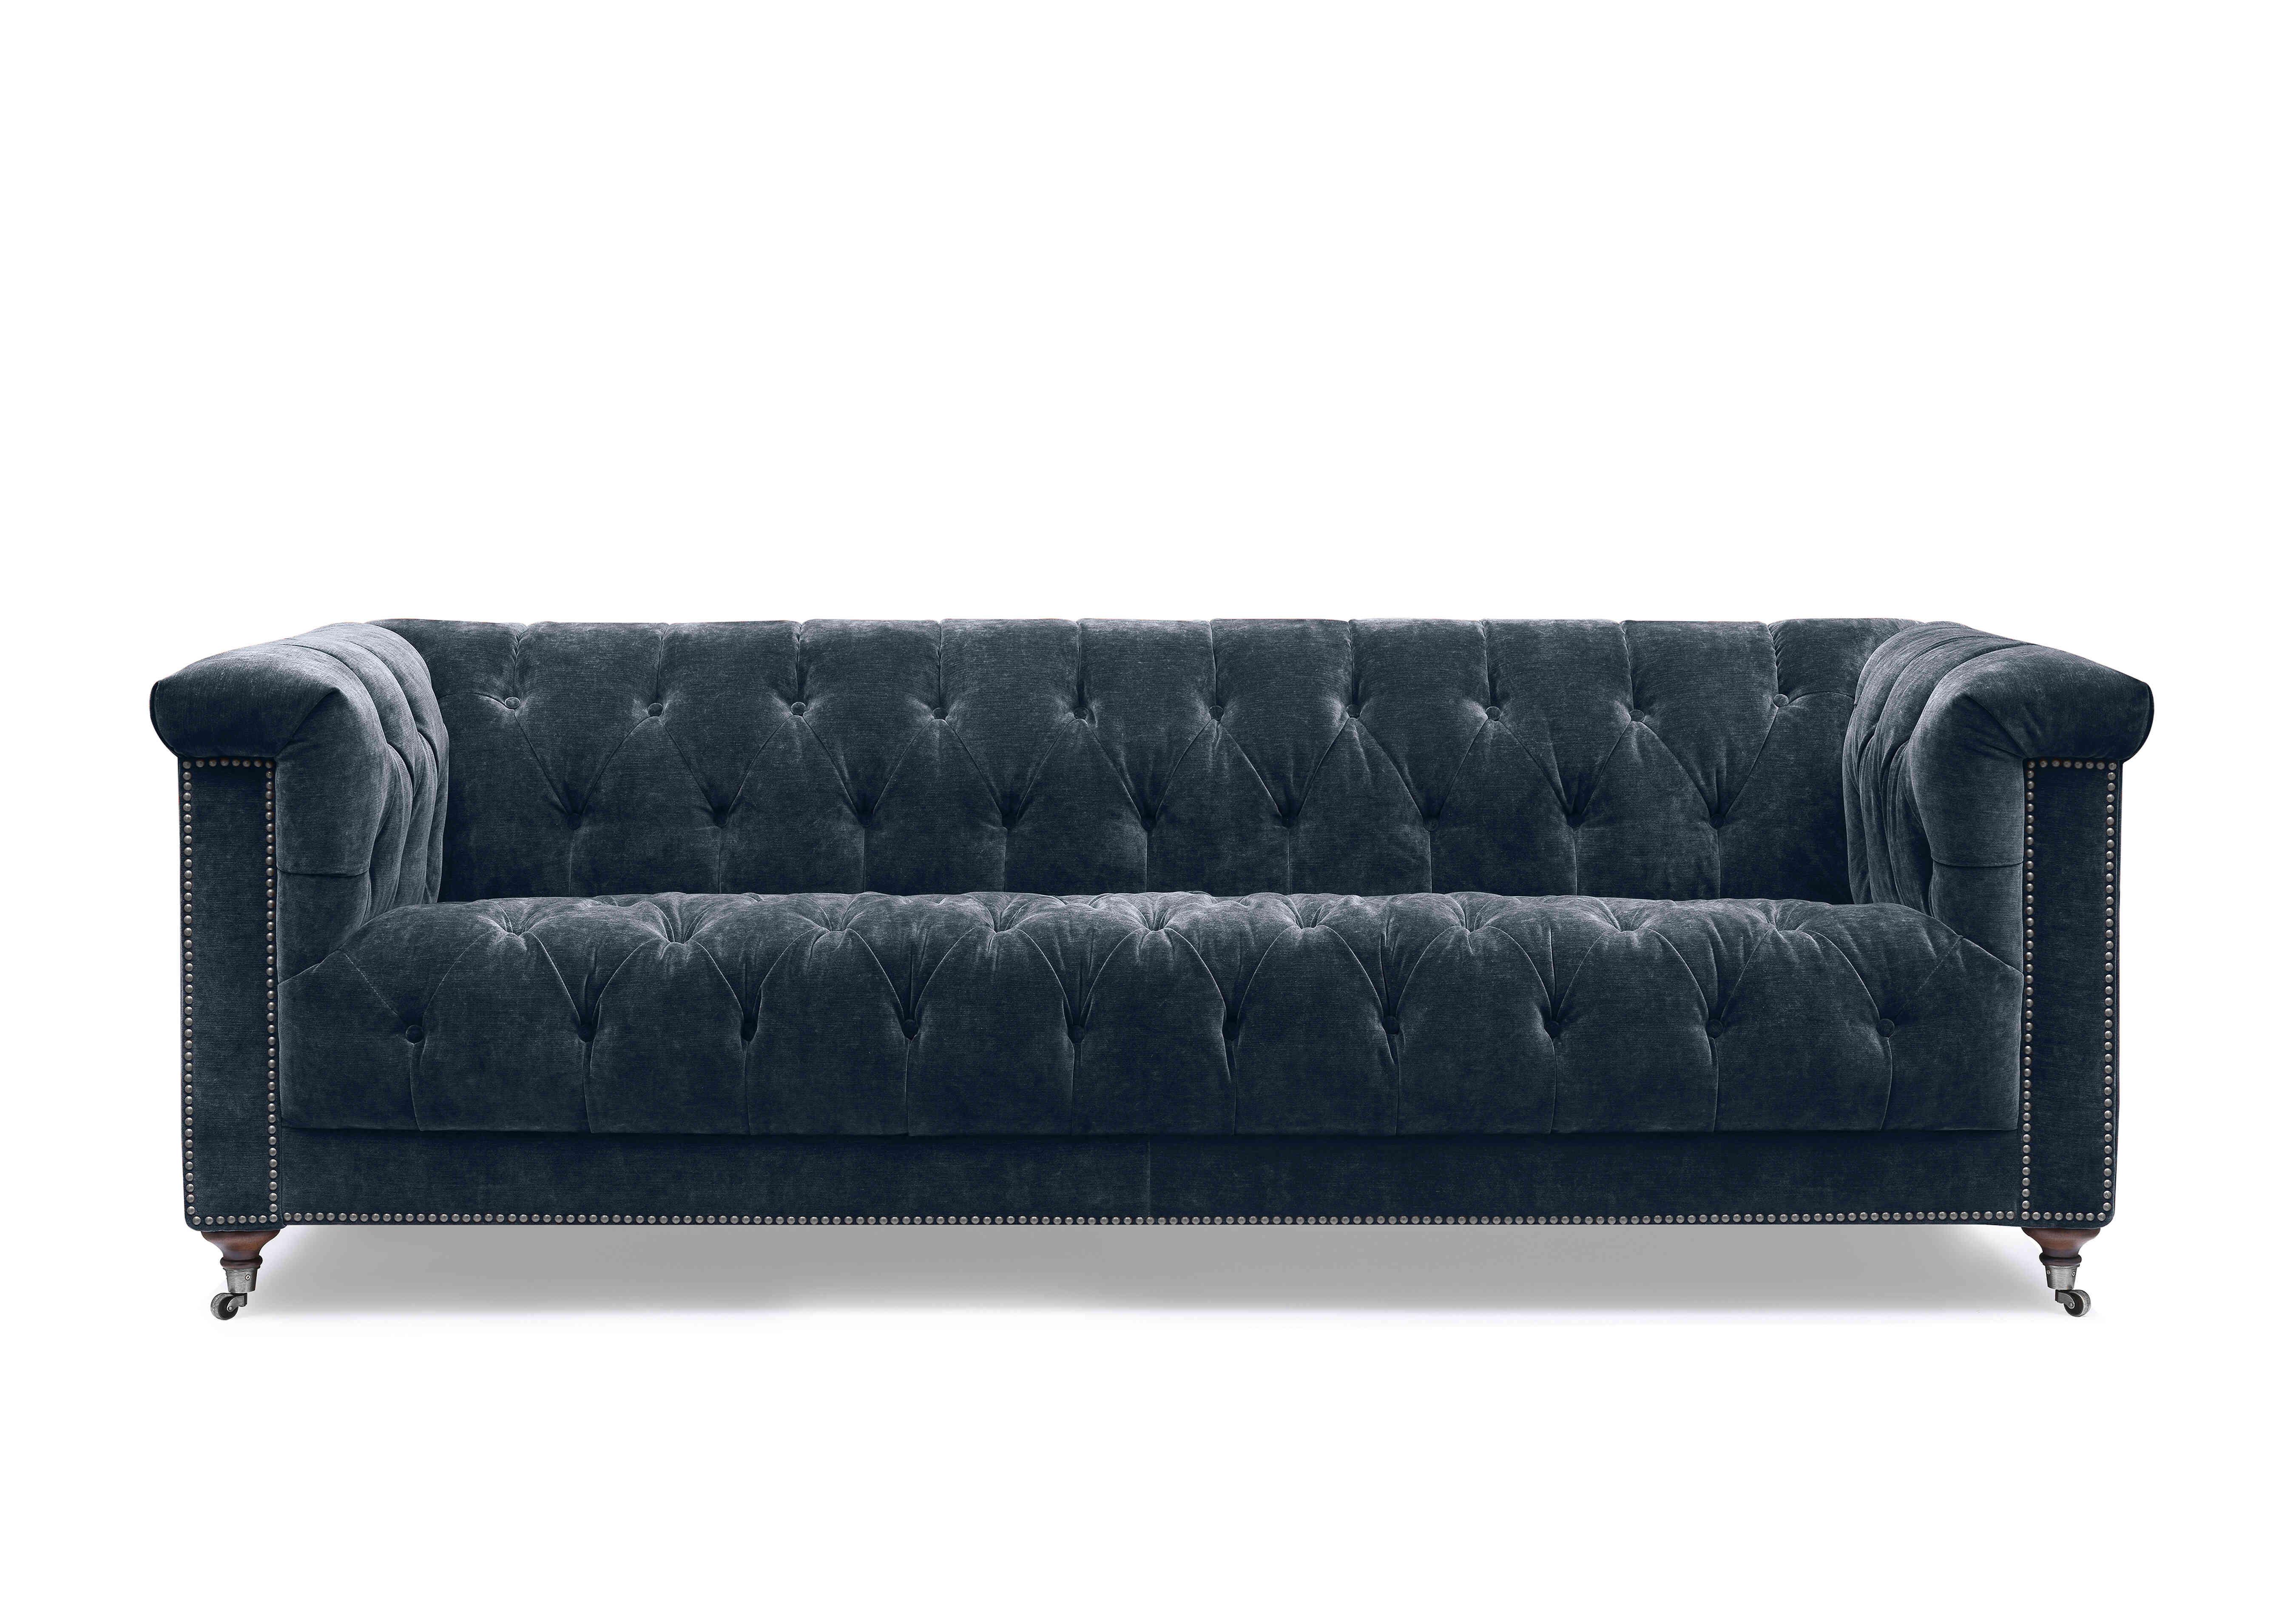 Wallace 4 Seater Fabric Chesterfield Sofa with USB-C in X3y2-W024 Midnight on Furniture Village